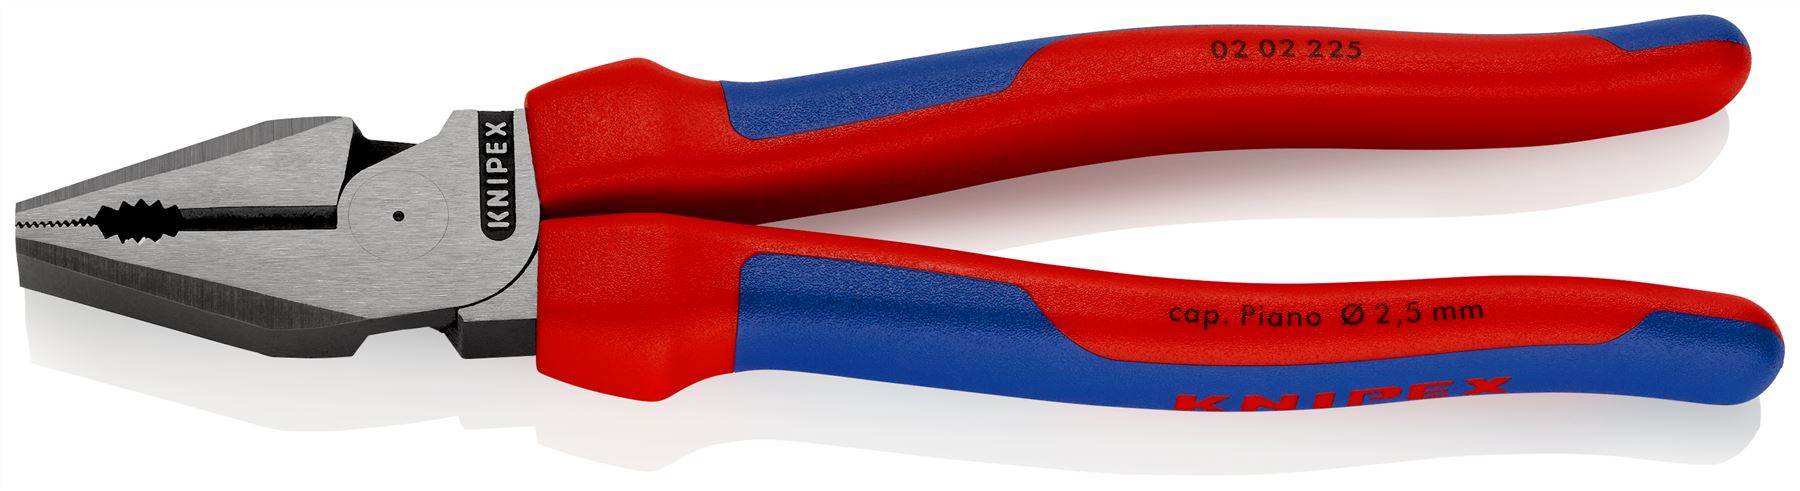 KNIPEX Revolving Punch Pliers 2-5mm Capacity 220mm for Fabrics Leather